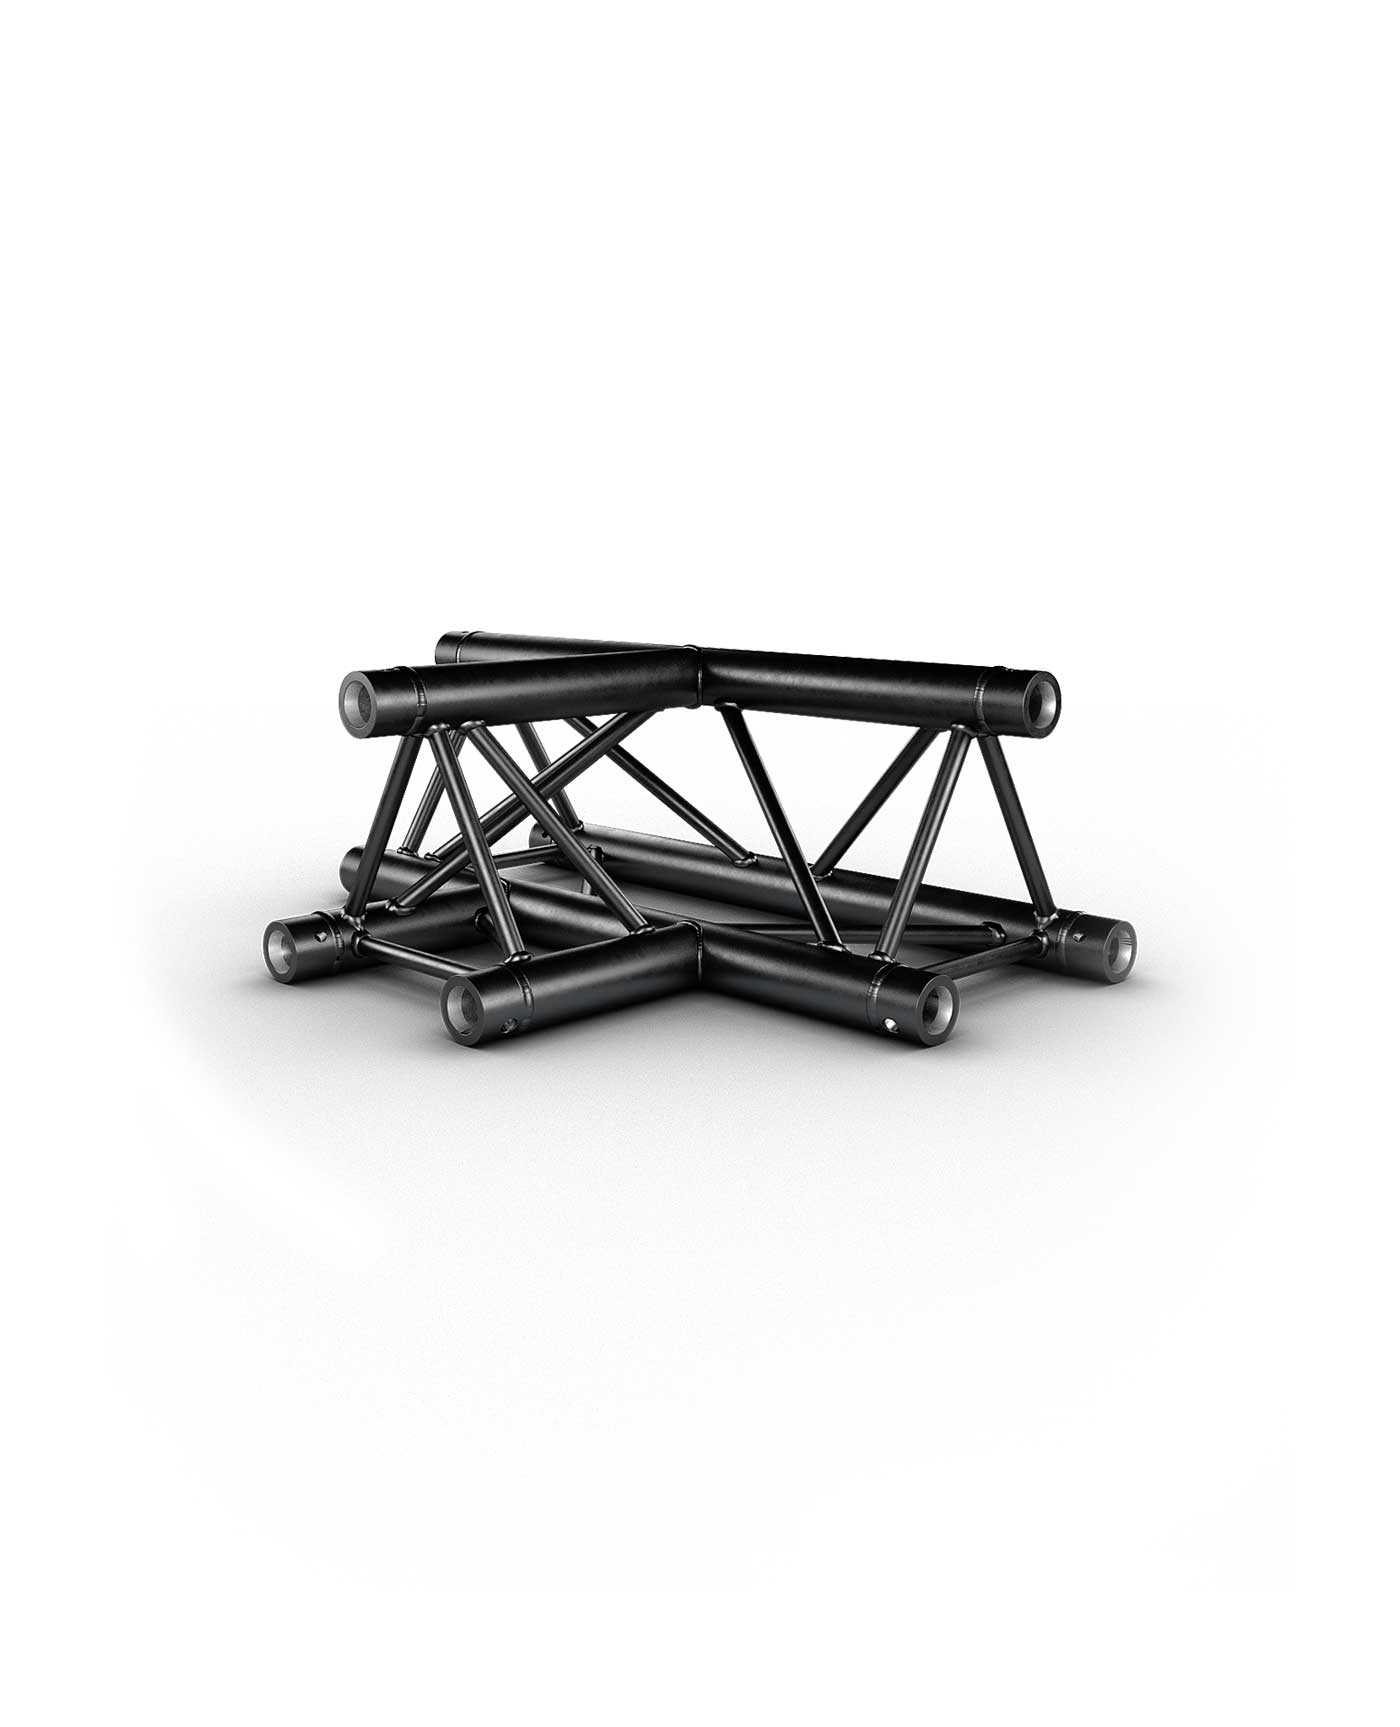 TRUSS TRIO 290 Horizontal tee - Black - 90- - 3 directions - Connection kits included